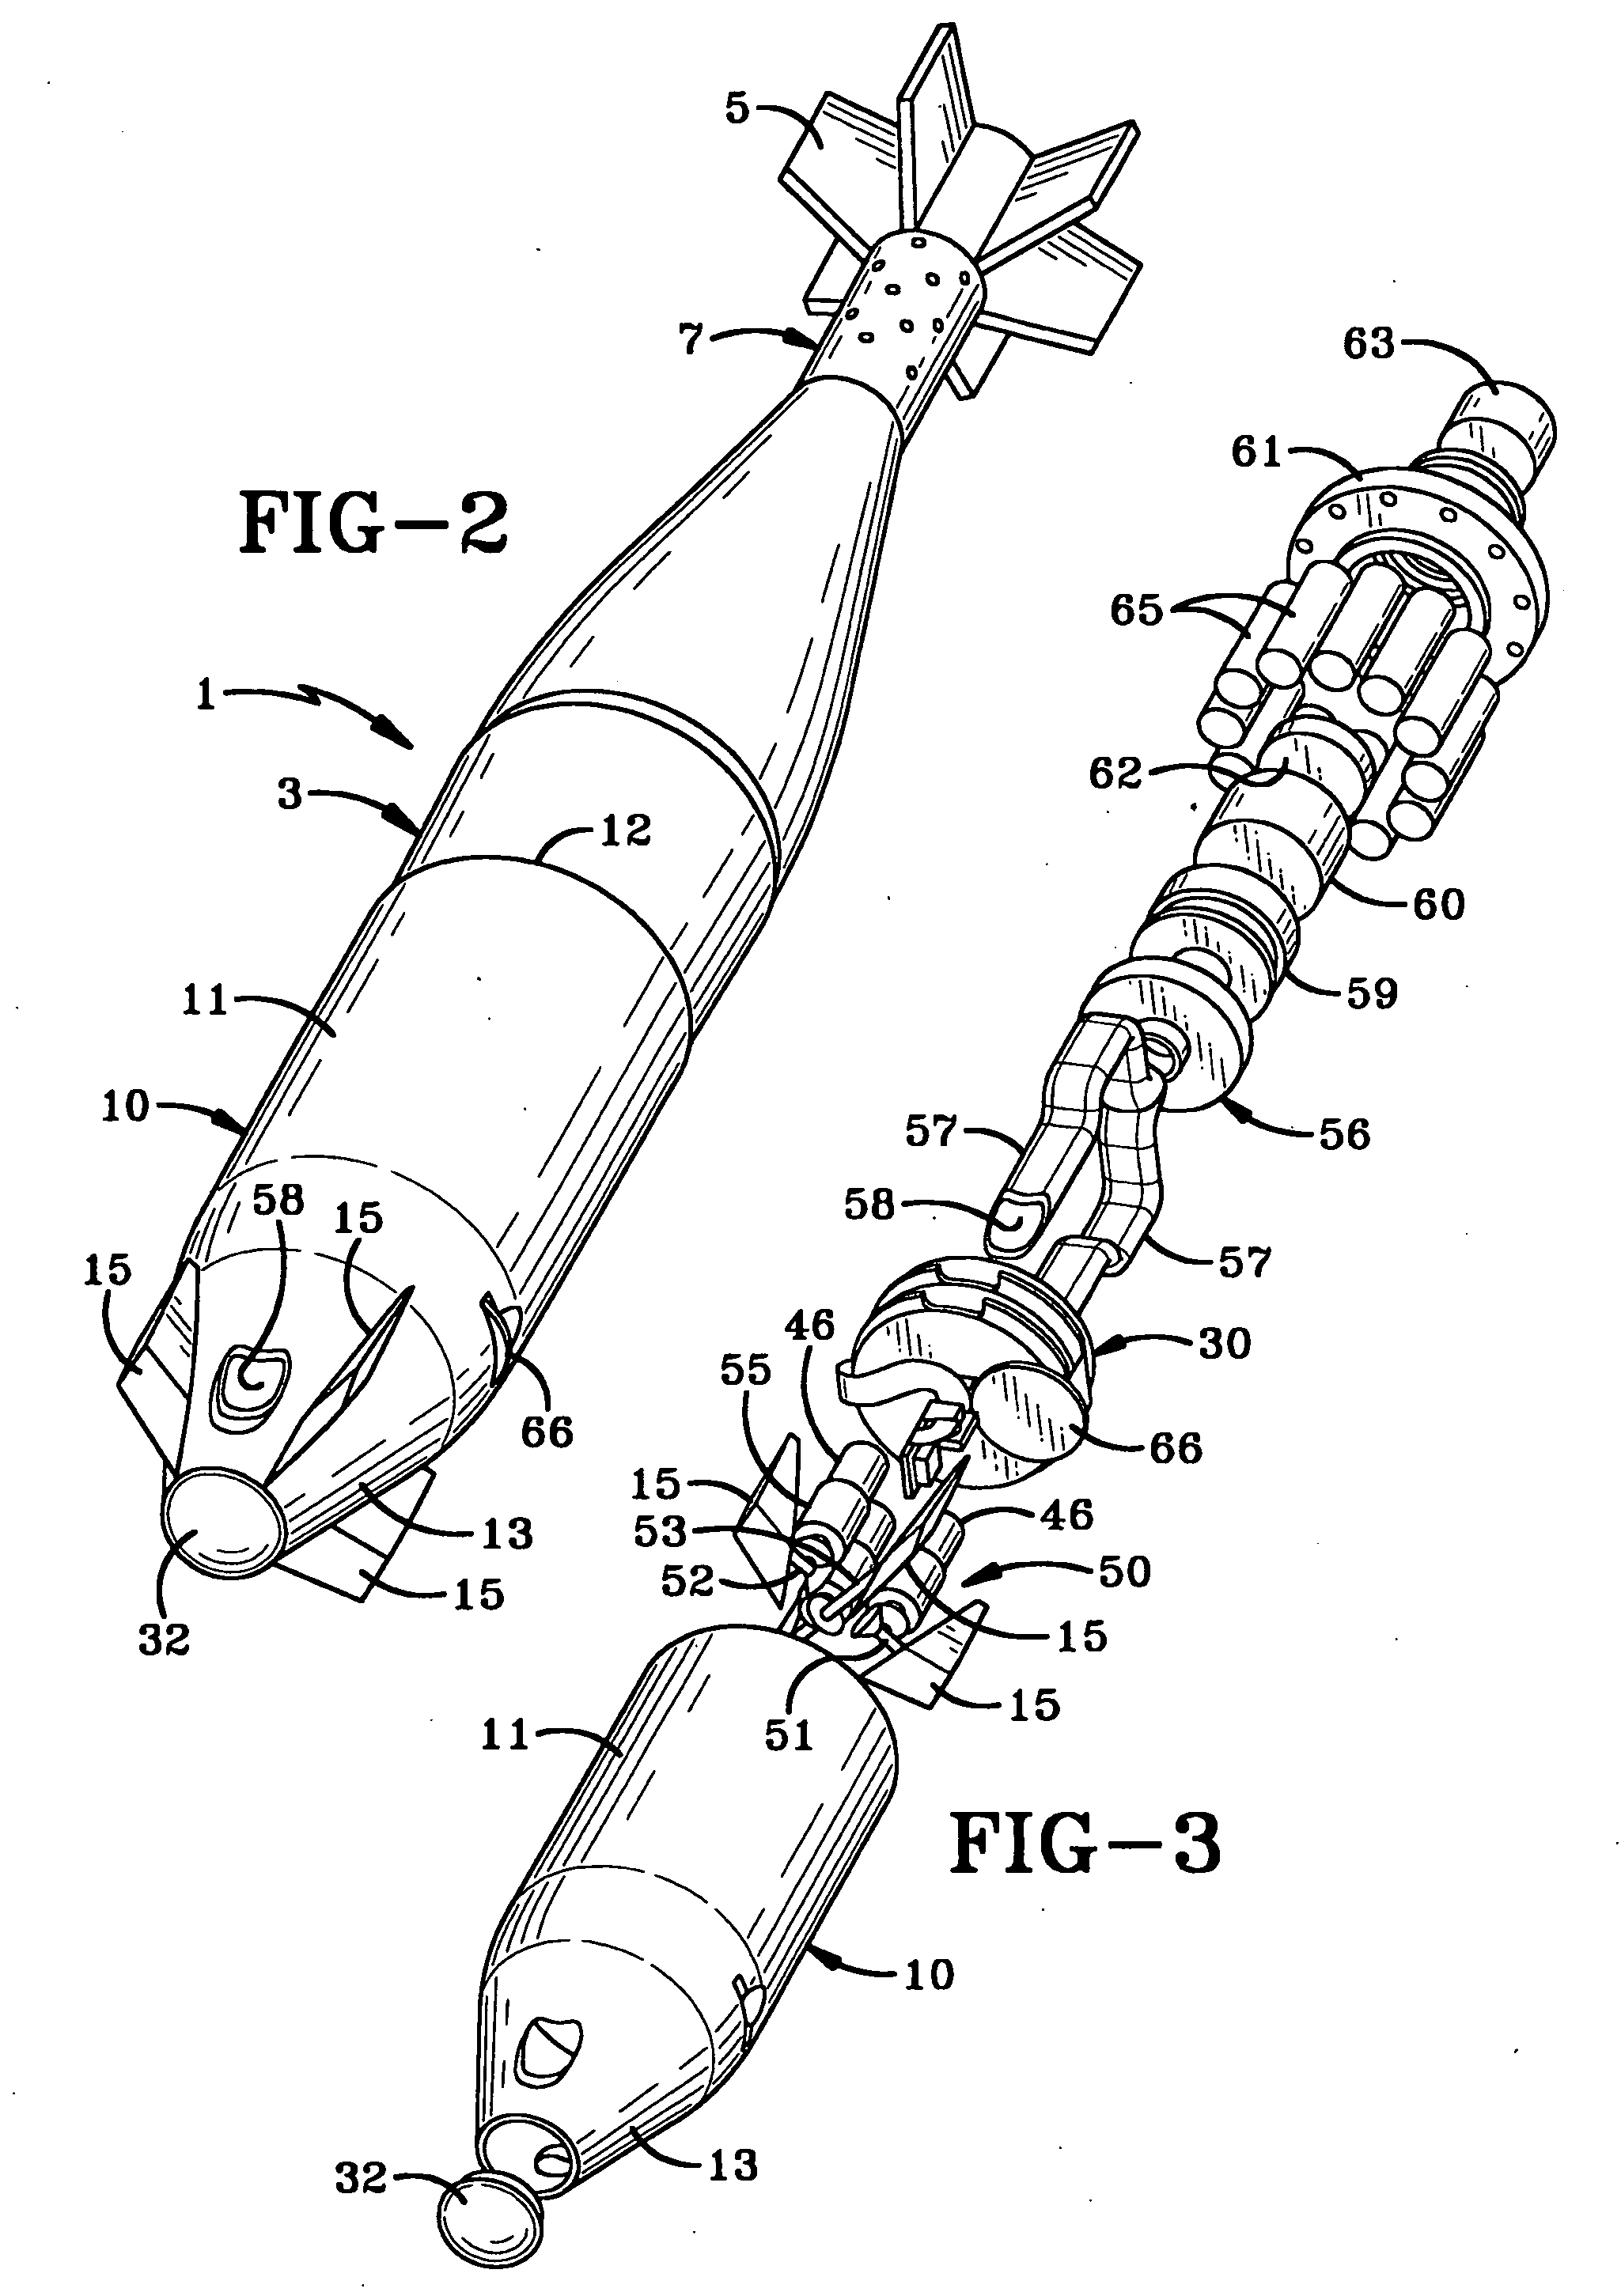 Optically Guided Munition Control System and Method